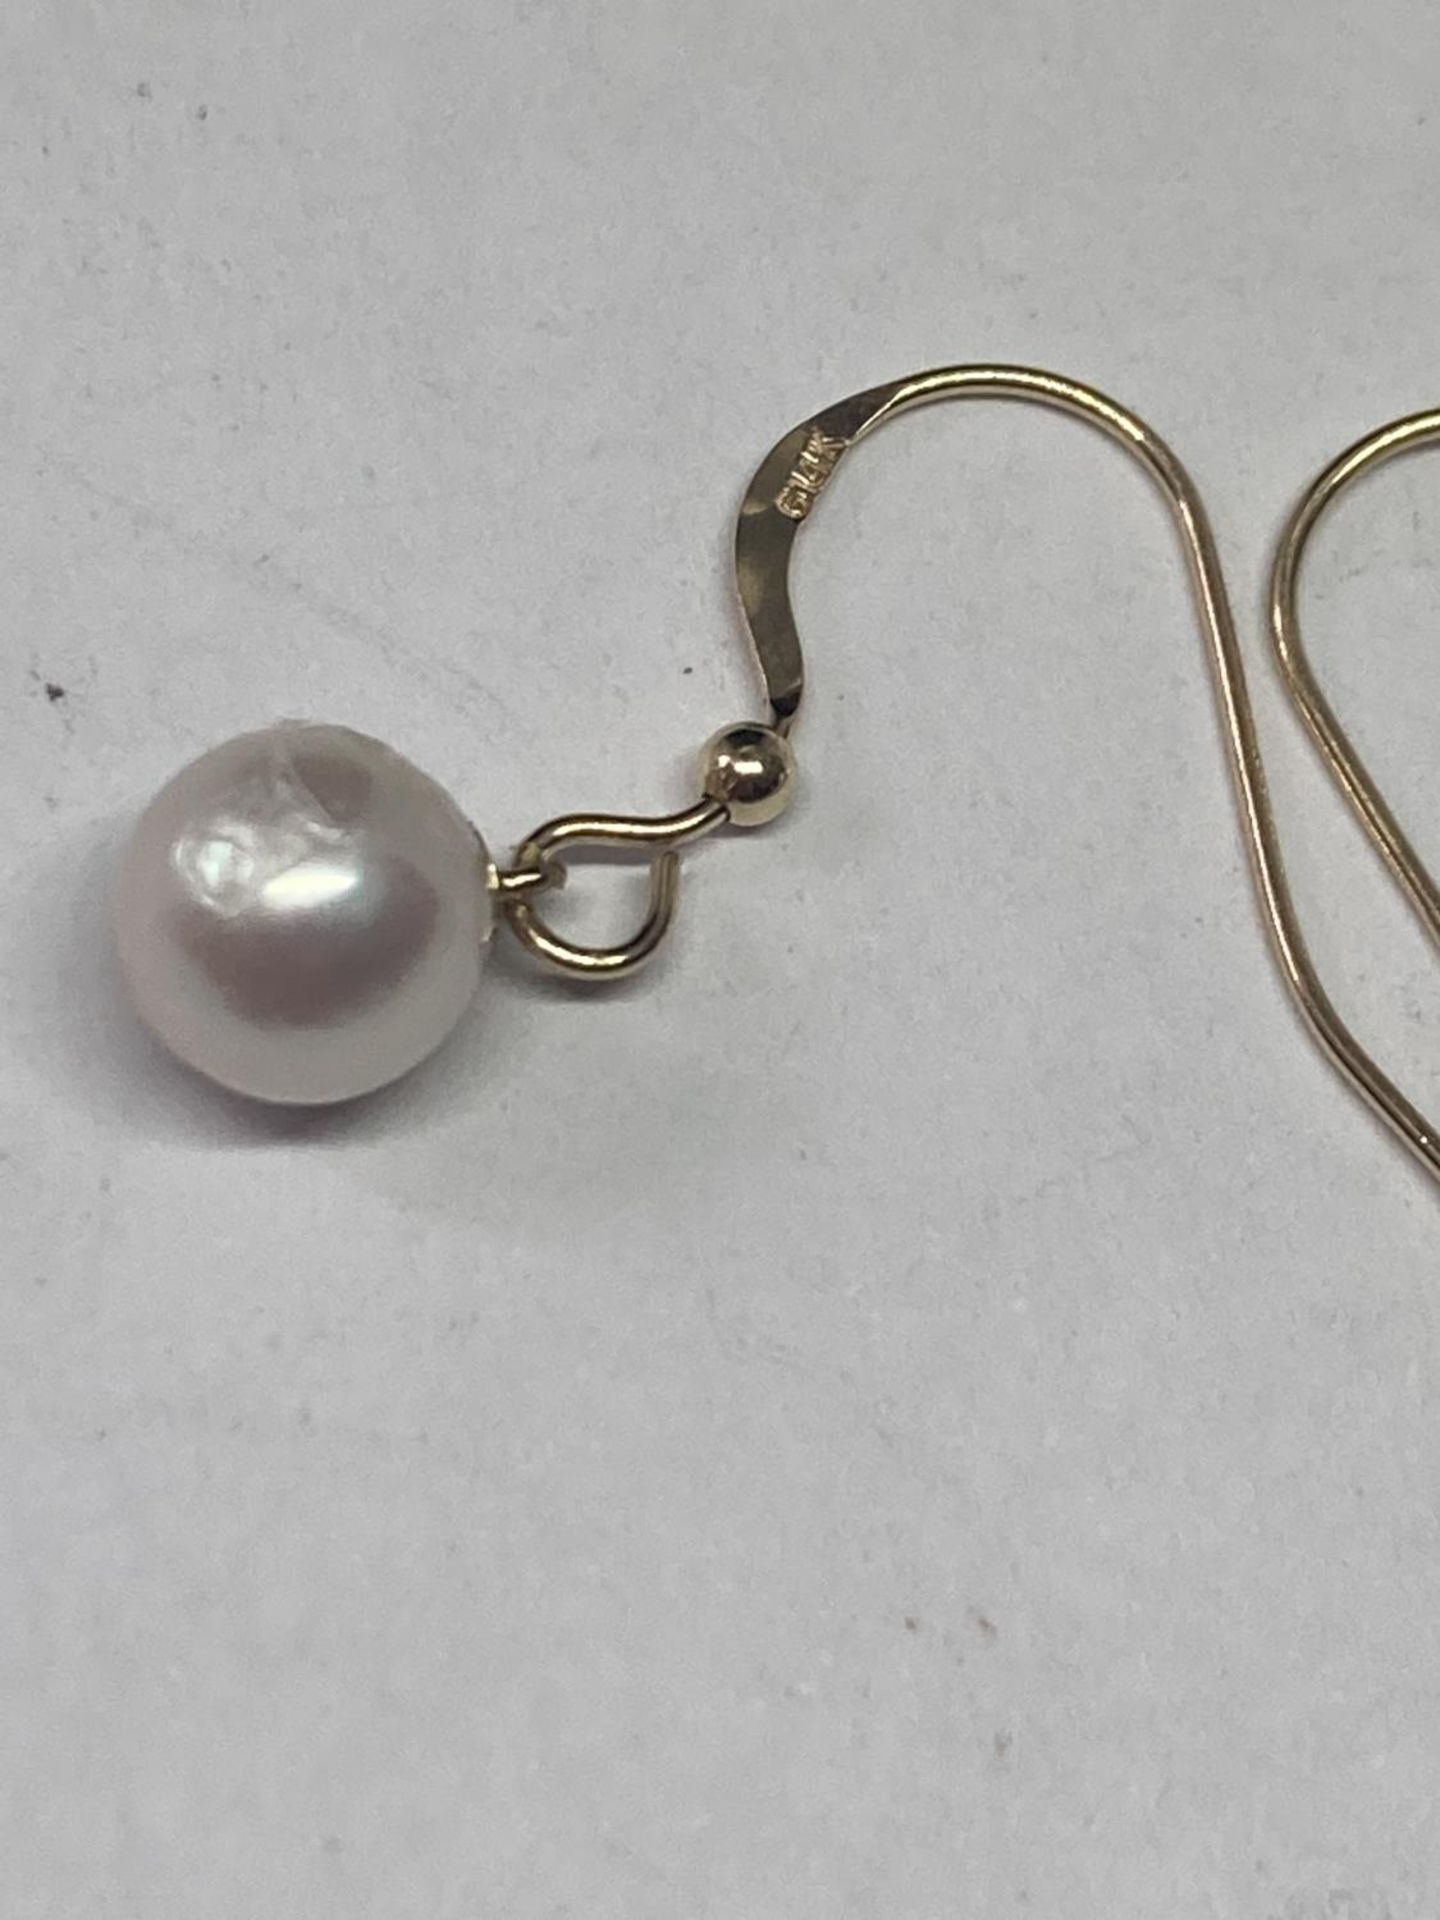 A PAIR OF MARKED 14K PEARL EARRINGS GROSS WEIGHT 1.36 GRAMS - Image 2 of 4